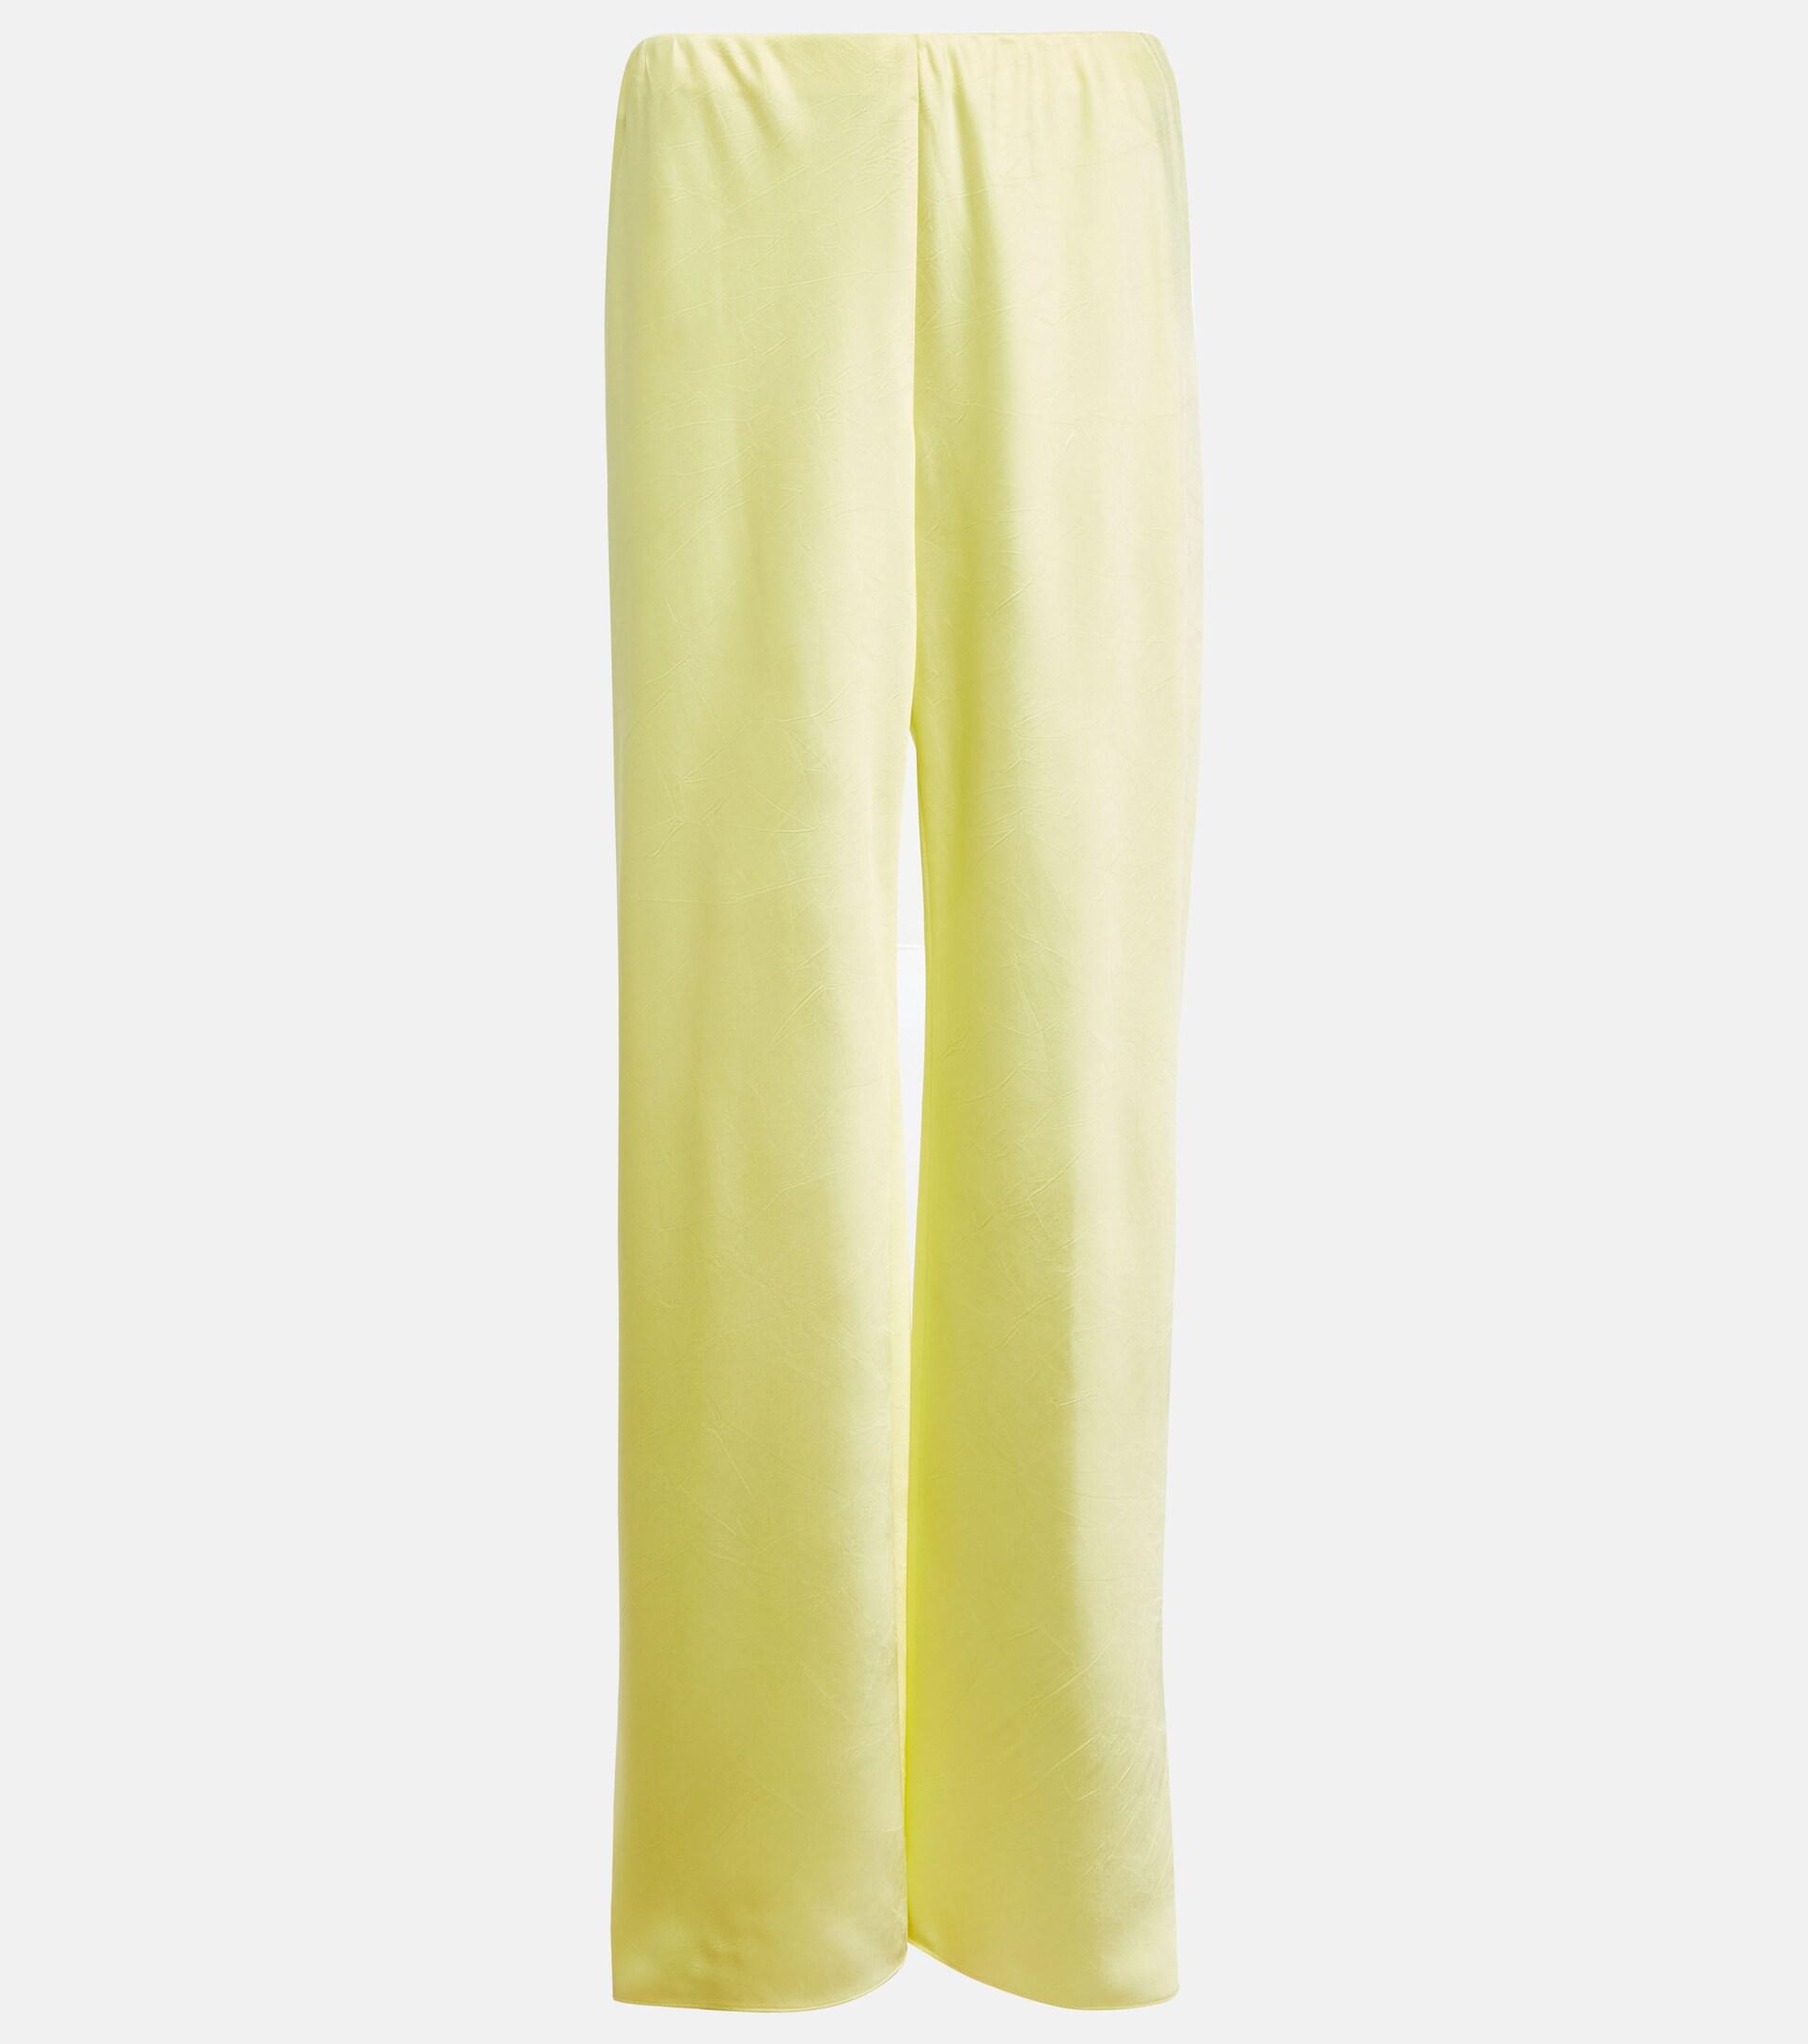 Buy Light Yellow Pant Pack of 2 at Amazon.in